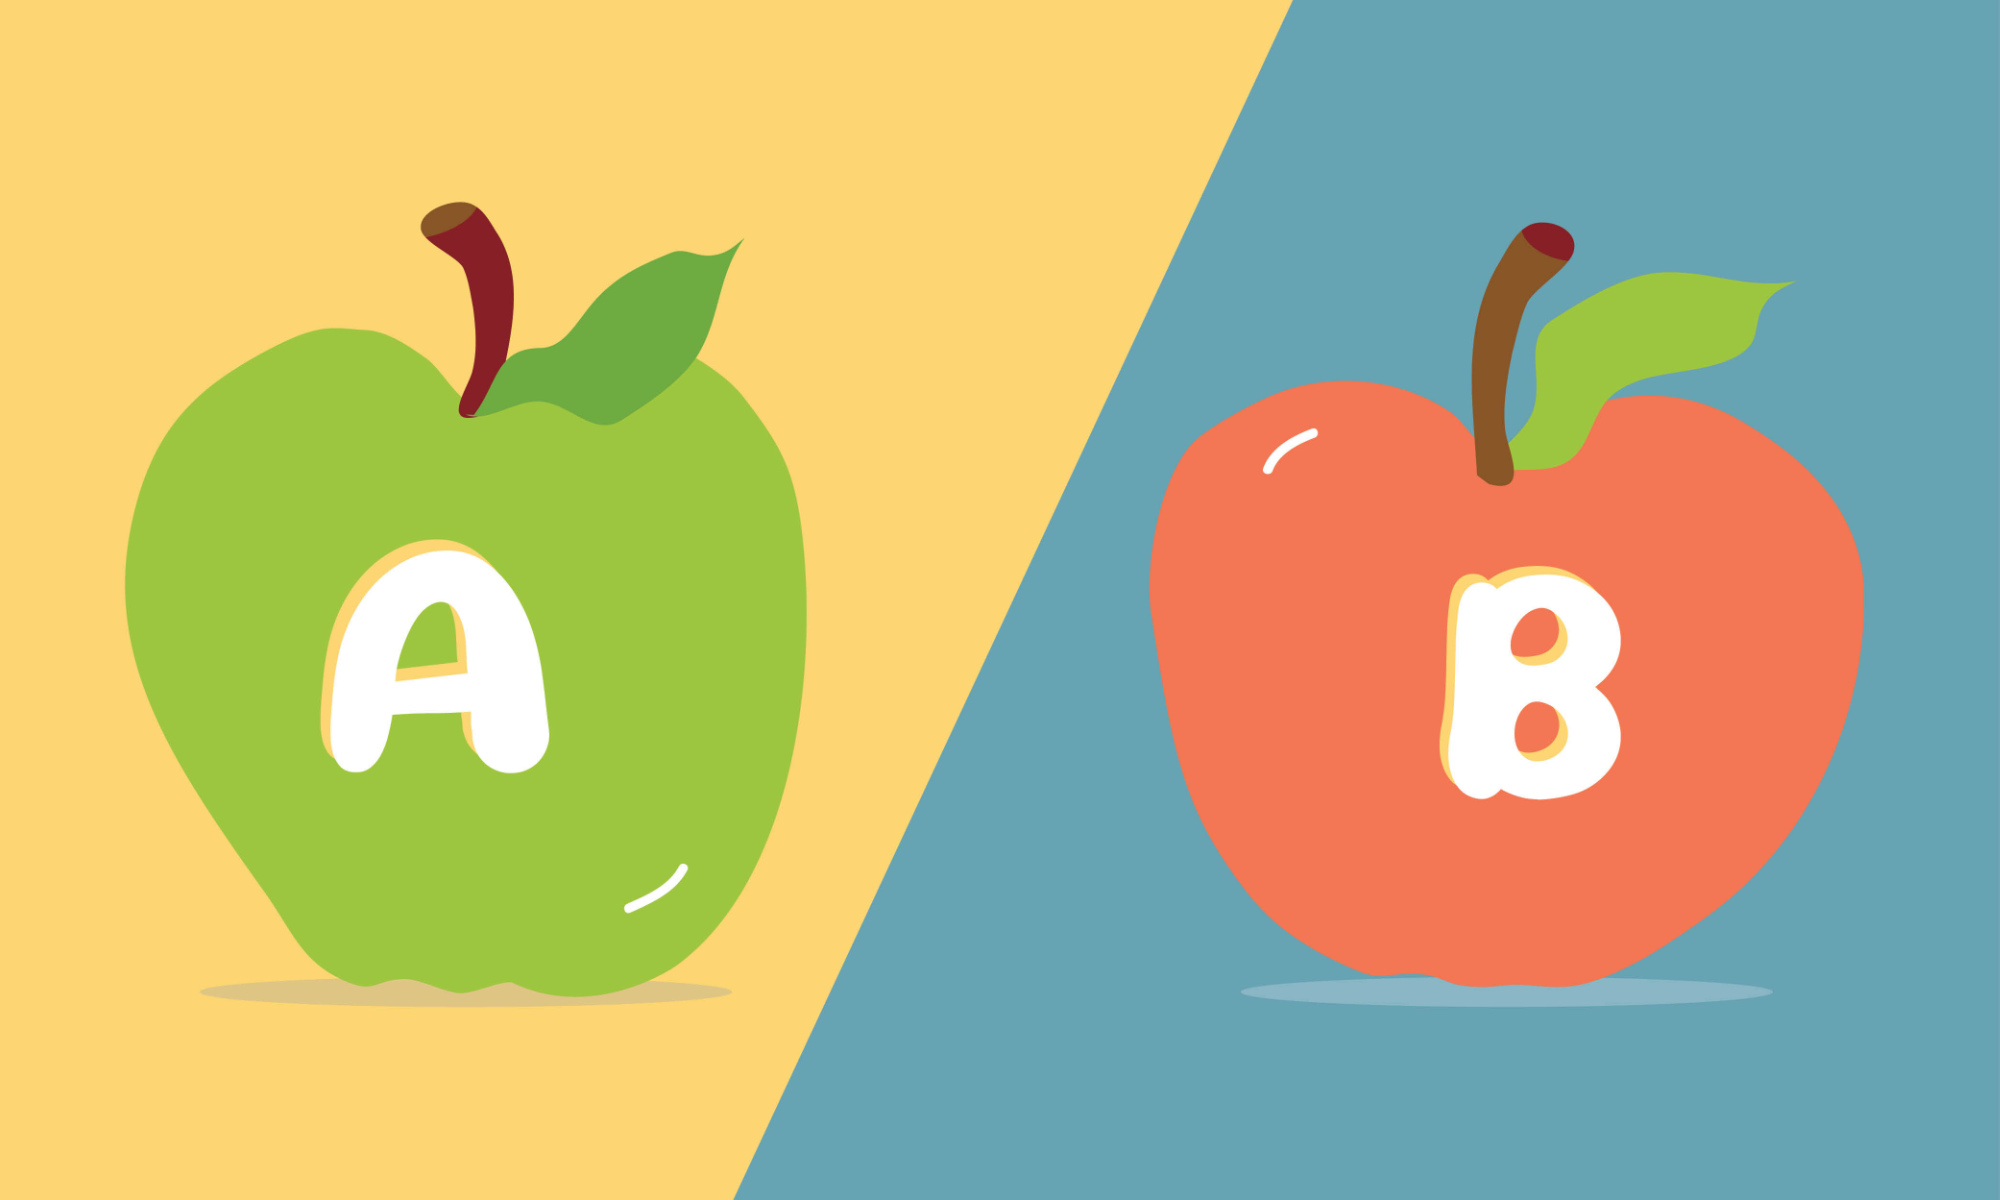 A green apple with an "A" on it against a yellow background, and a red apple with a "B" on it against a blue background to illustrate and explains what is school choice.